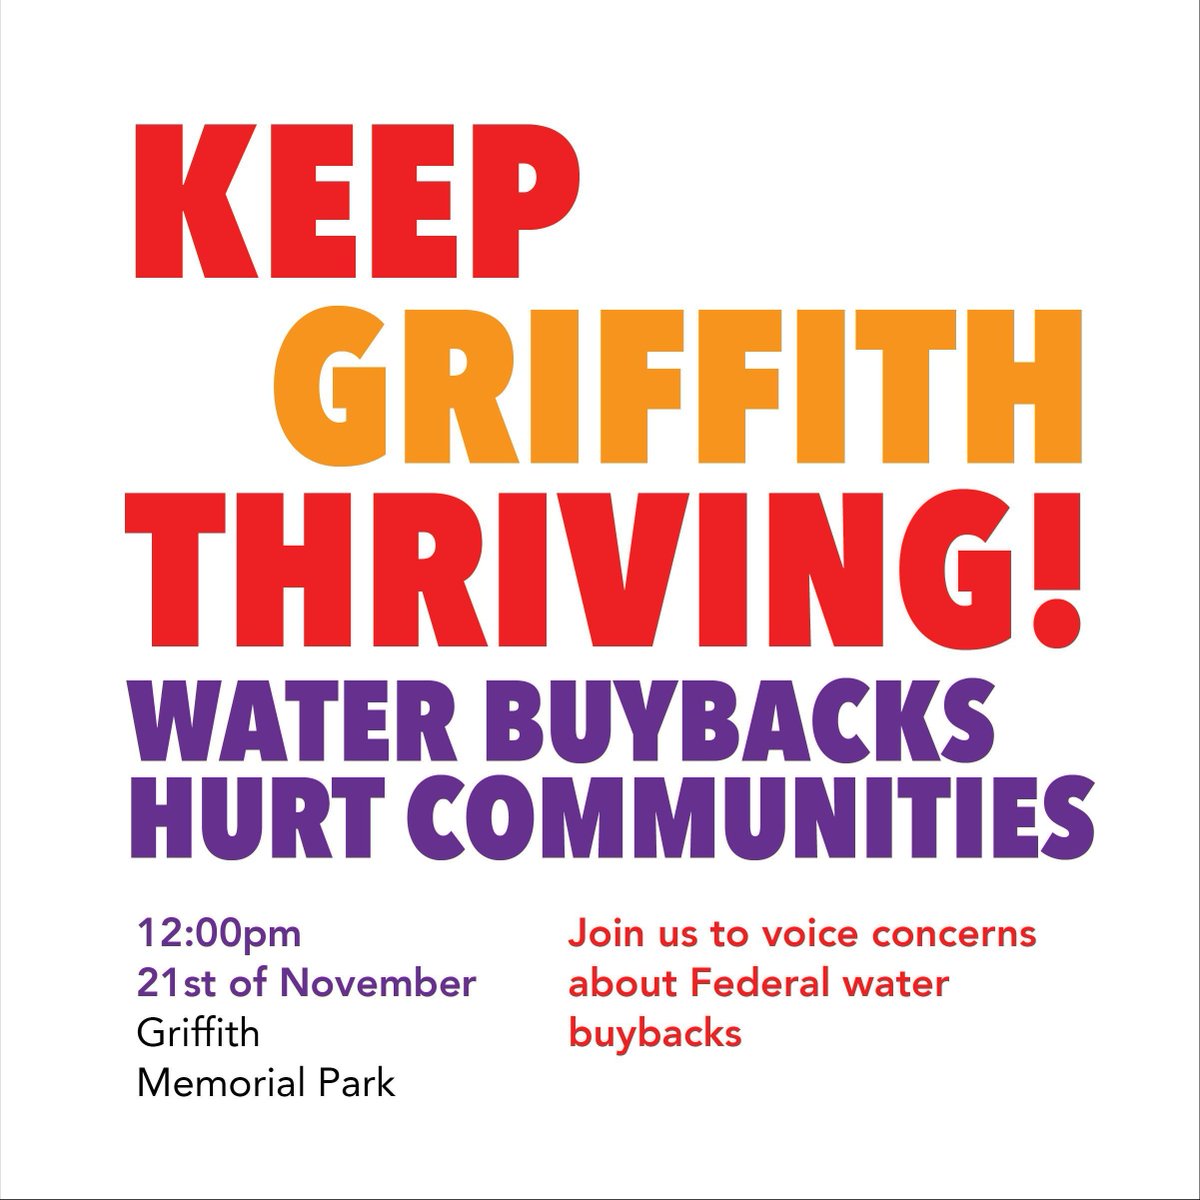 Are you in the Griffith area? Join the community rally to oppose the rewrite of the Murray Darling Basin Plan. When: Tuesday 21 November Time: 11:30am for a 12pm start Where: Griffith Memorial Park Event link for updates: buff.ly/3SDeCqX